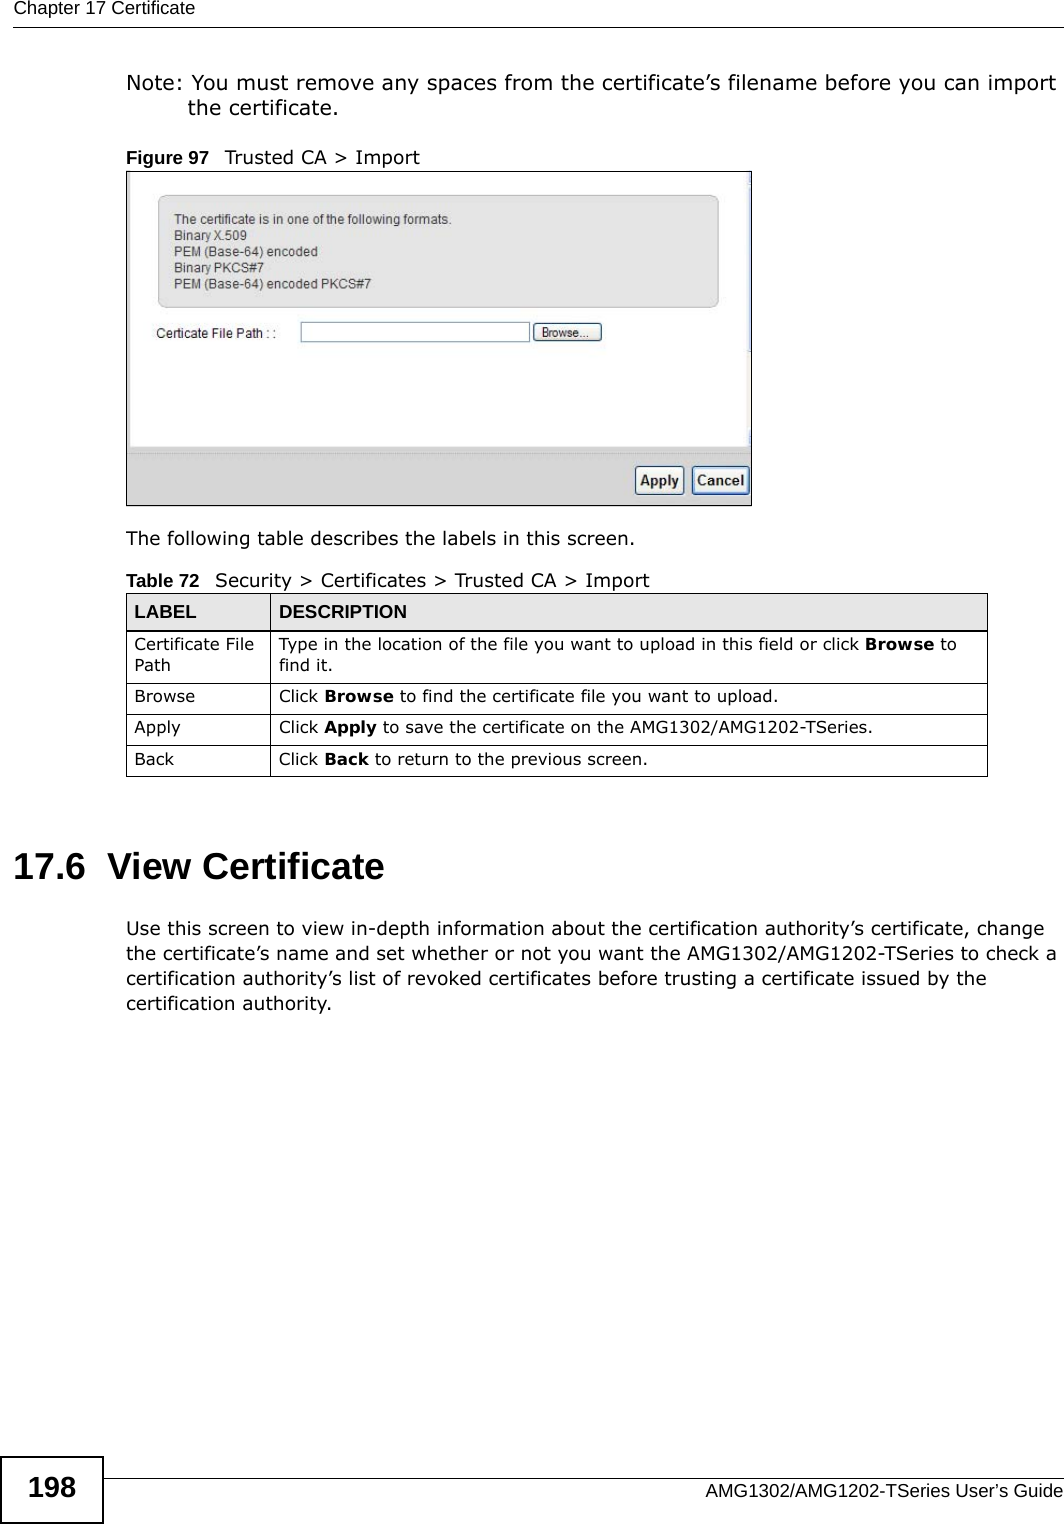 Chapter 17 CertificateAMG1302/AMG1202-TSeries User’s Guide198Note: You must remove any spaces from the certificate’s filename before you can import the certificate.Figure 97   Trusted CA &gt; ImportThe following table describes the labels in this screen.17.6  View Certificate Use this screen to view in-depth information about the certification authority’s certificate, change the certificate’s name and set whether or not you want the AMG1302/AMG1202-TSeries to check a certification authority’s list of revoked certificates before trusting a certificate issued by the certification authority.Table 72   Security &gt; Certificates &gt; Trusted CA &gt; ImportLABEL DESCRIPTIONCertificate File Path Type in the location of the file you want to upload in this field or click Browse to find it.Browse Click Browse to find the certificate file you want to upload. Apply Click Apply to save the certificate on the AMG1302/AMG1202-TSeries.Back Click Back to return to the previous screen.